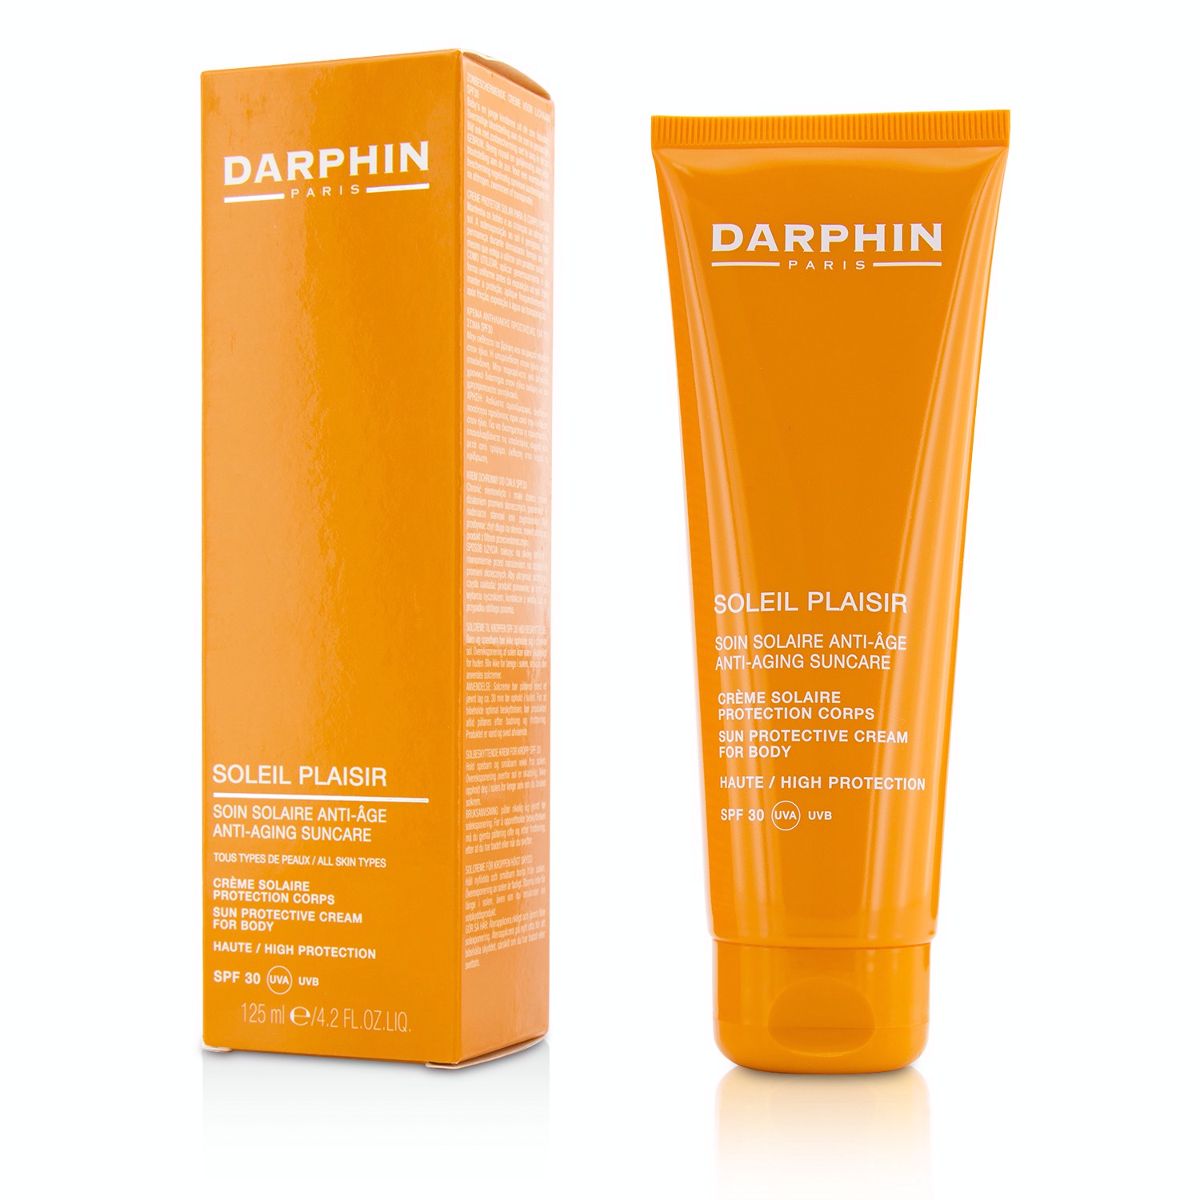 Soleil Plaisir Anti-Aging Suncare For Body SPF 30 Darphin Image